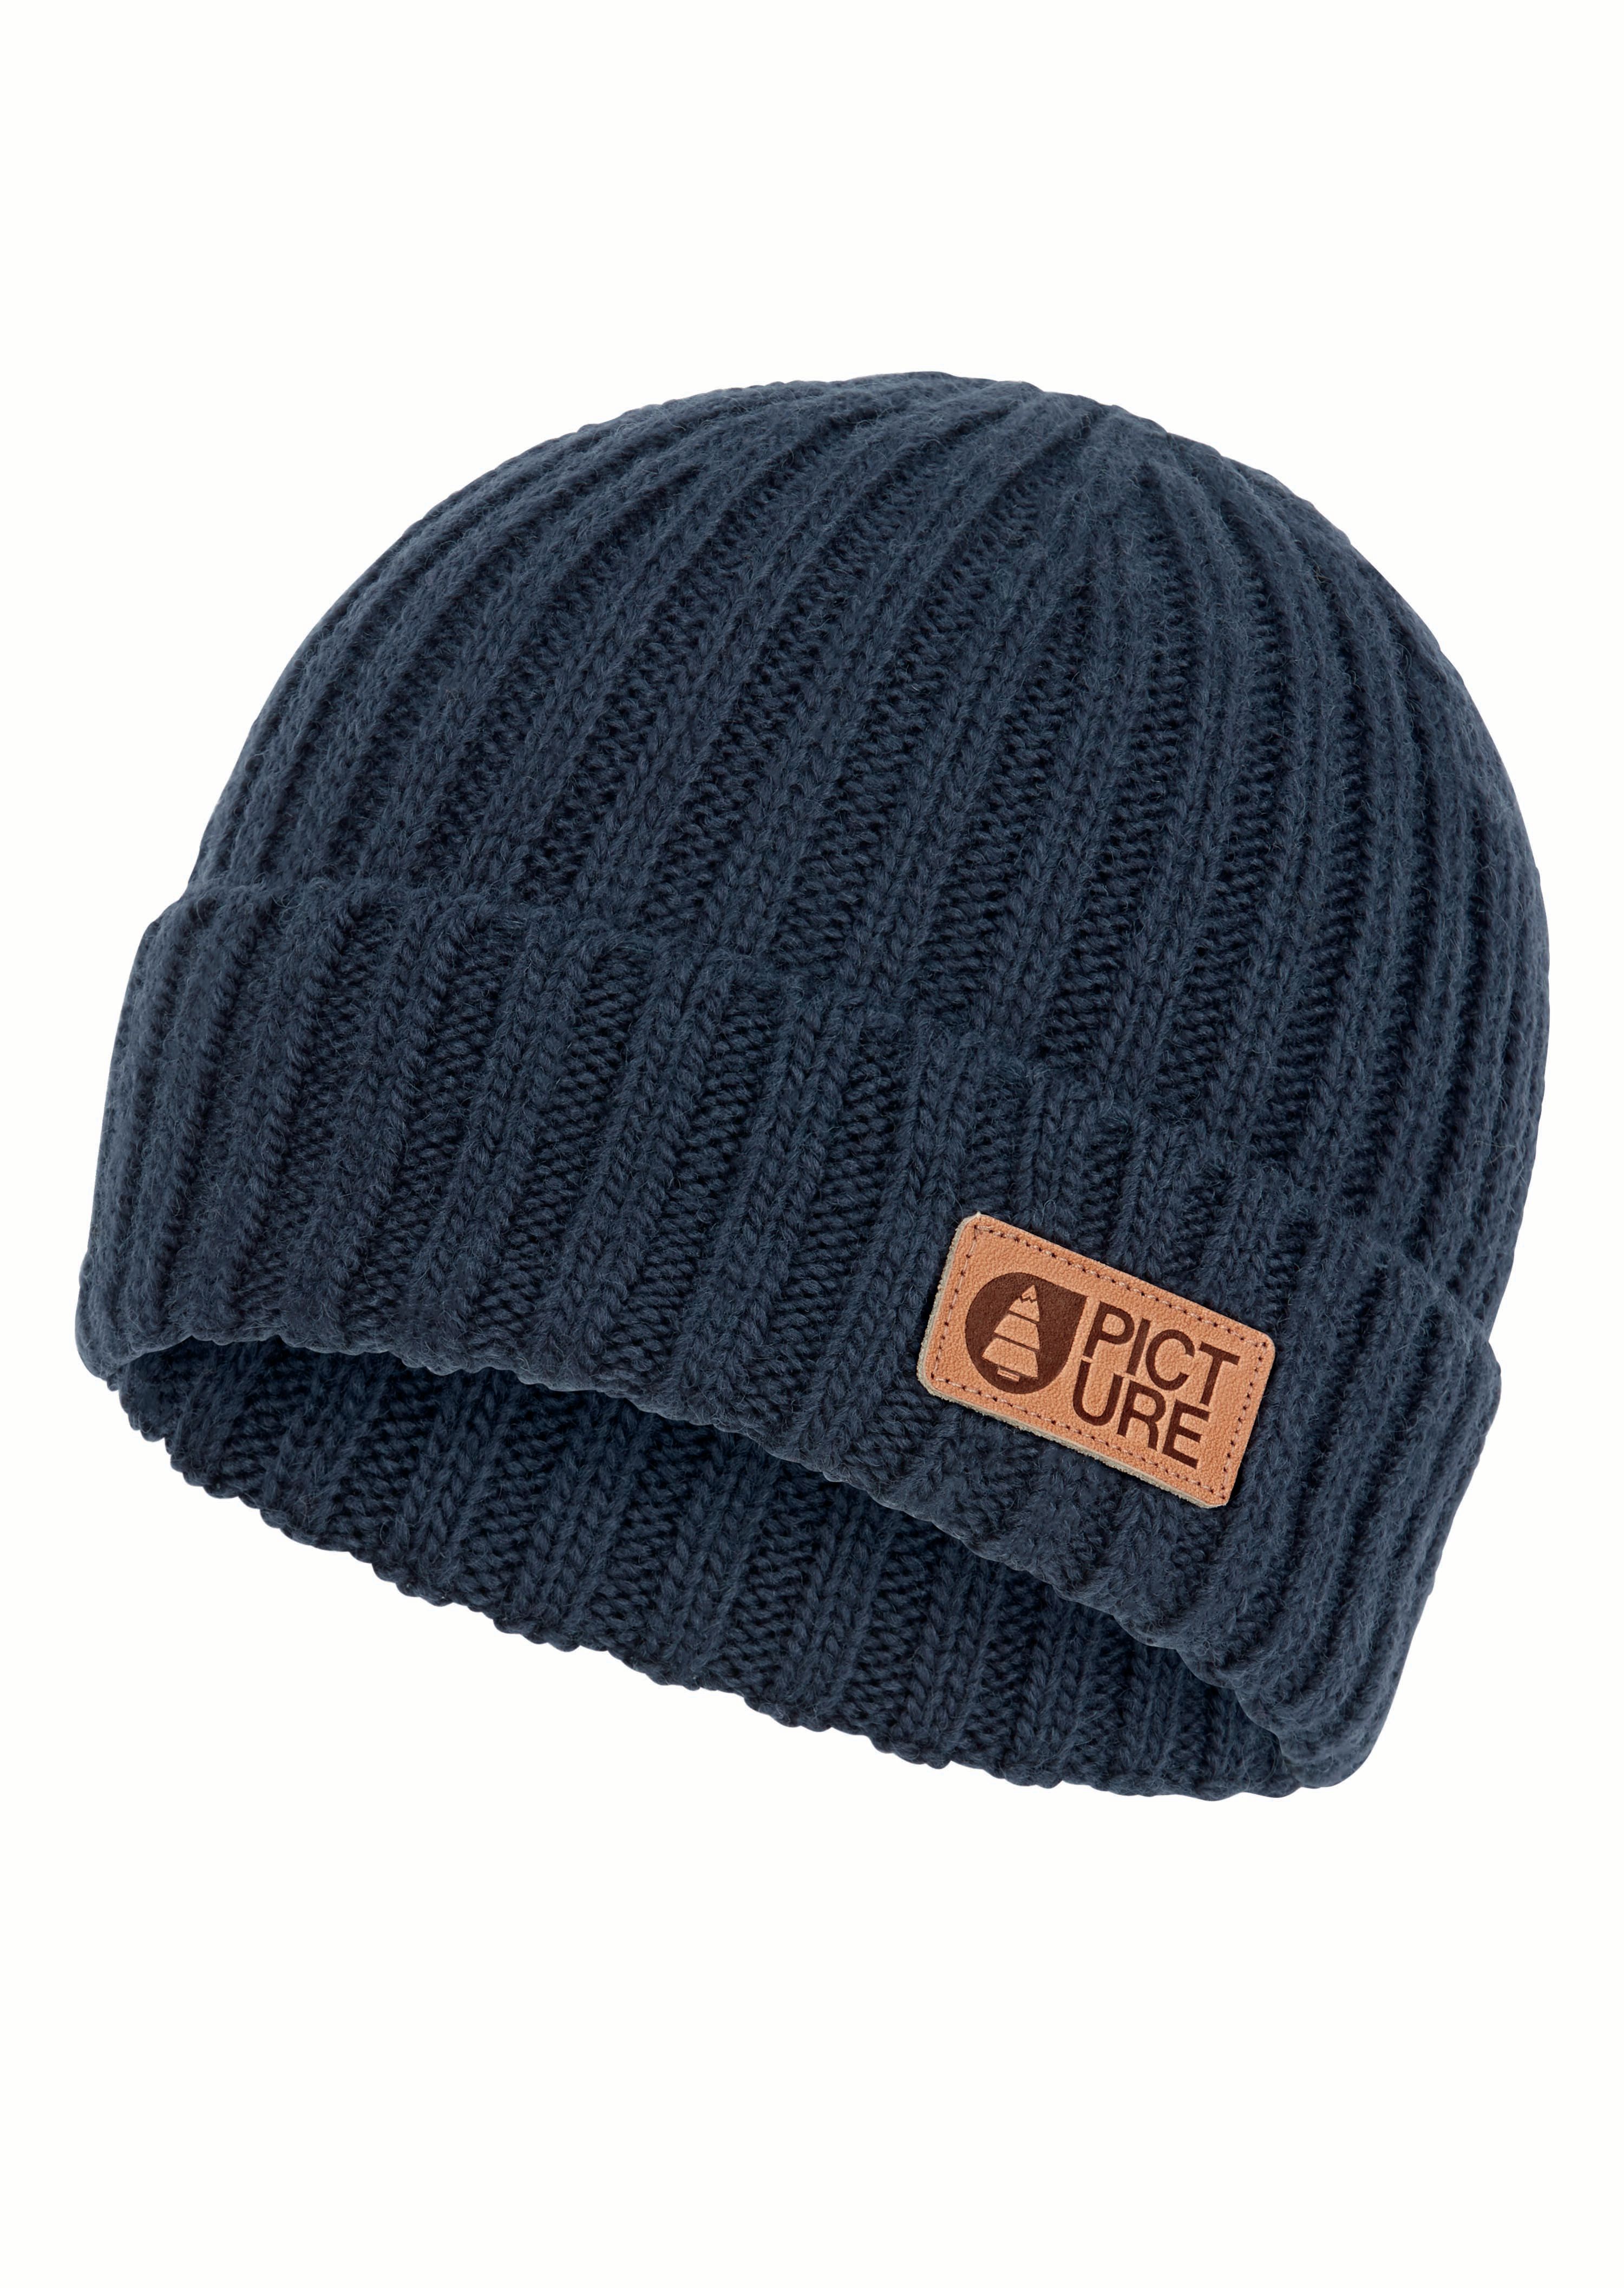 Picture - Ship Beanie